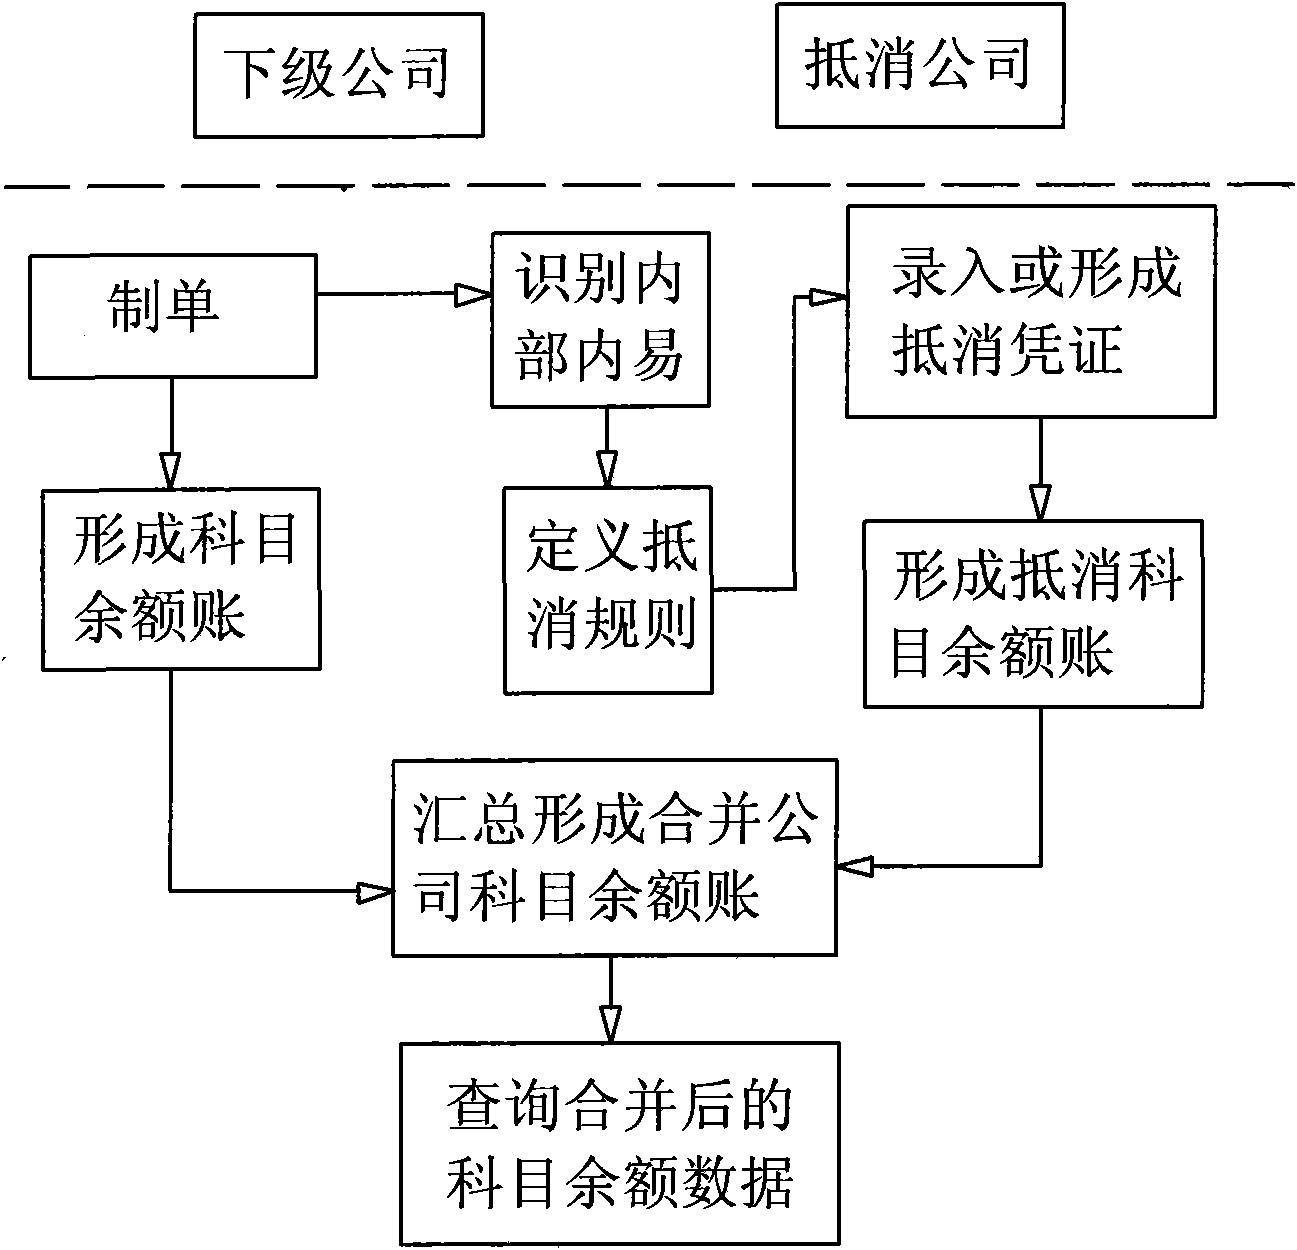 Method for designing group financial combination system based on real-time account incorporation